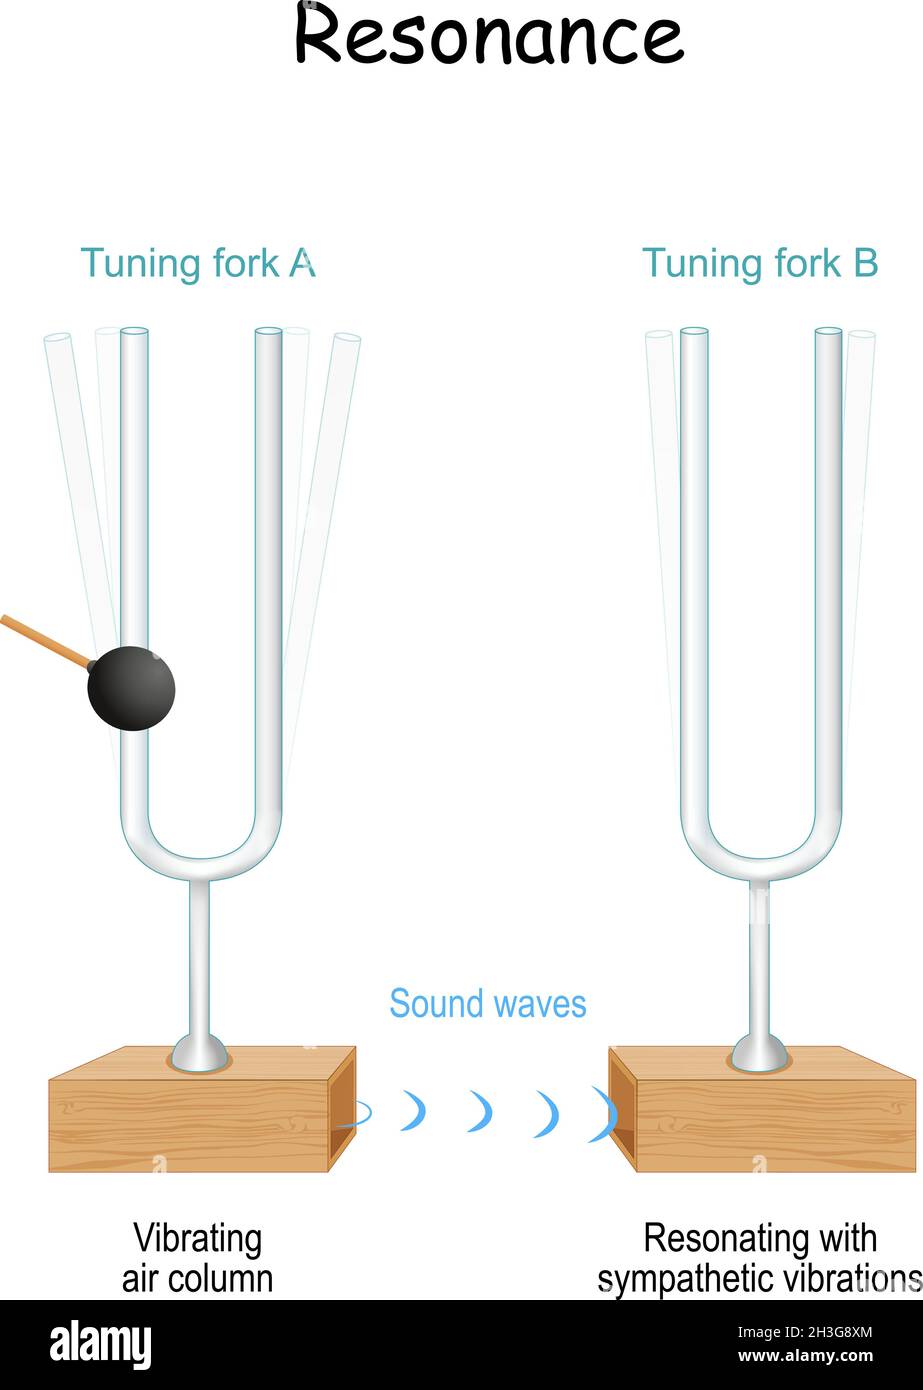 resonant frequencies of a tuning fork